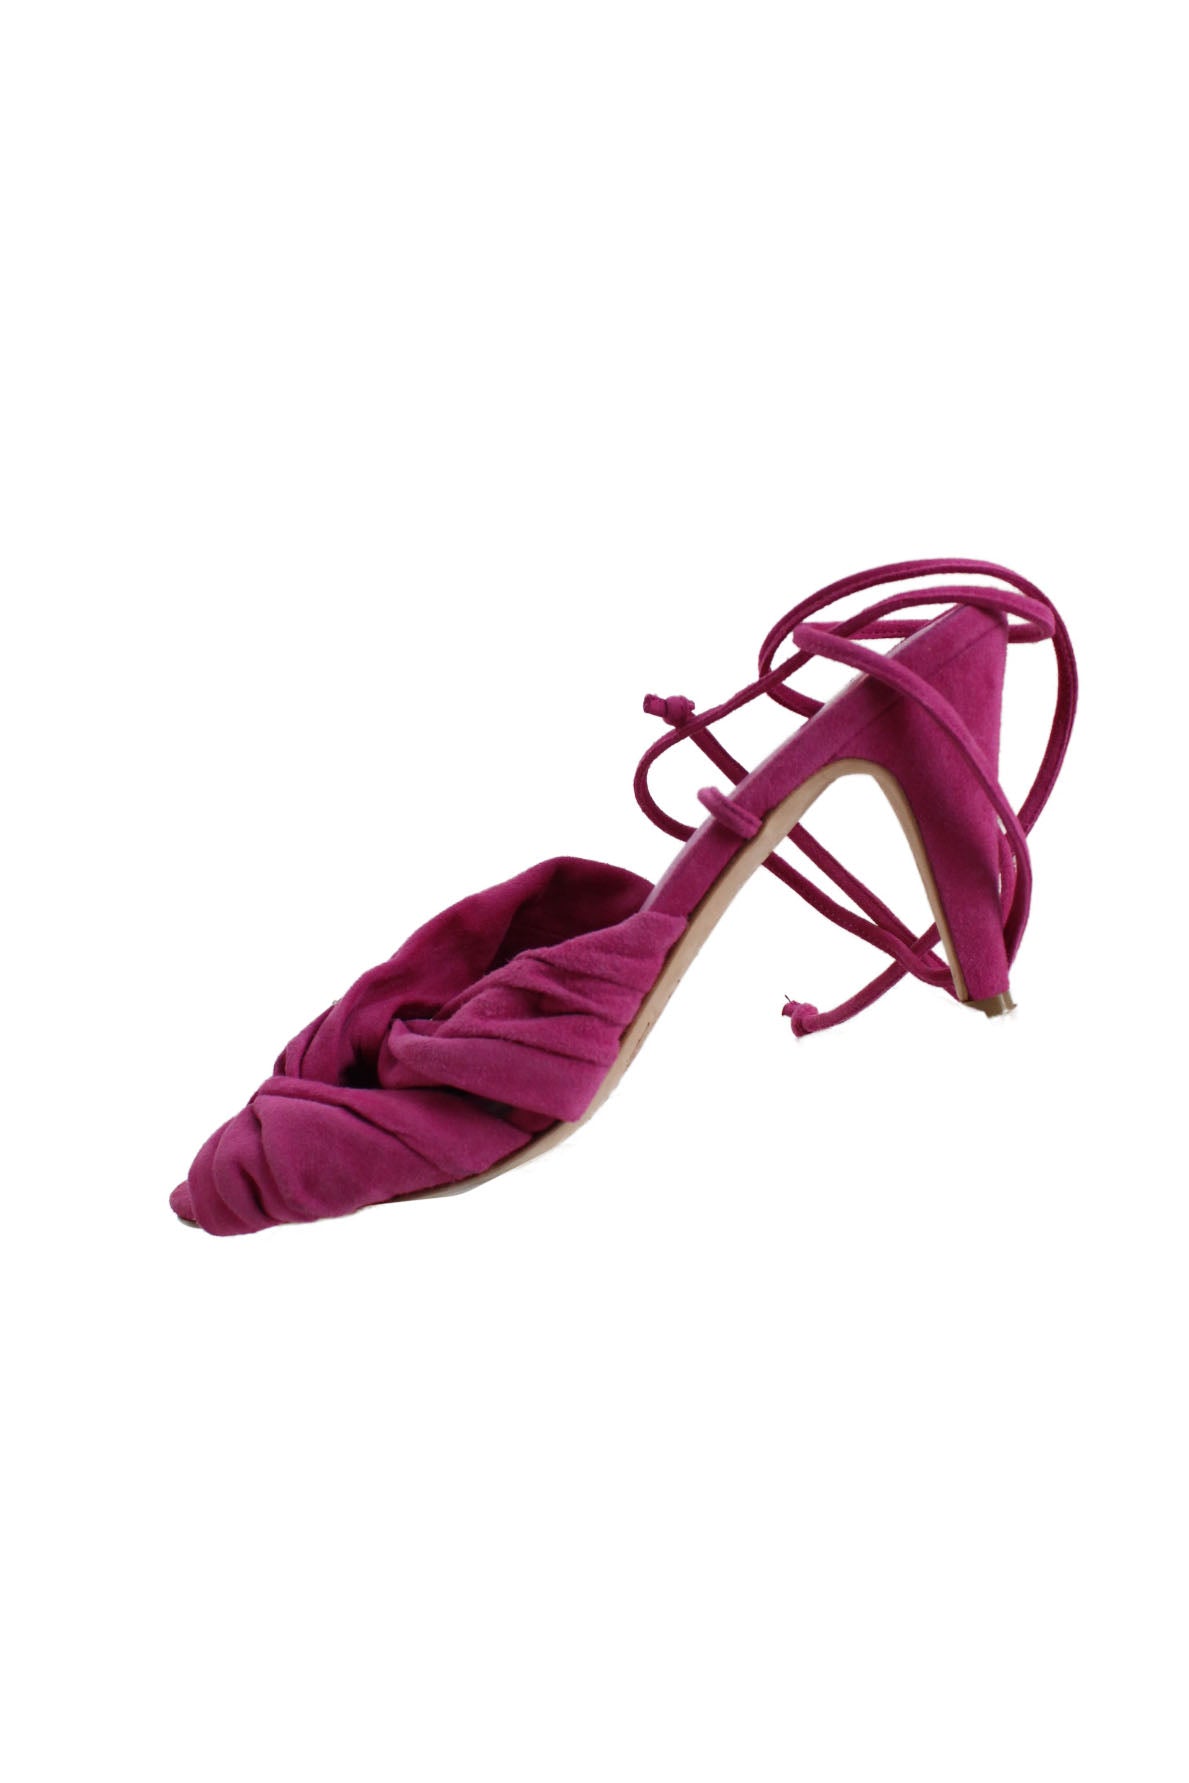 description: charlotte stone fuchsia heeled sandals. features open toe, strap closure at ankle, and rounded toe silhouette. 